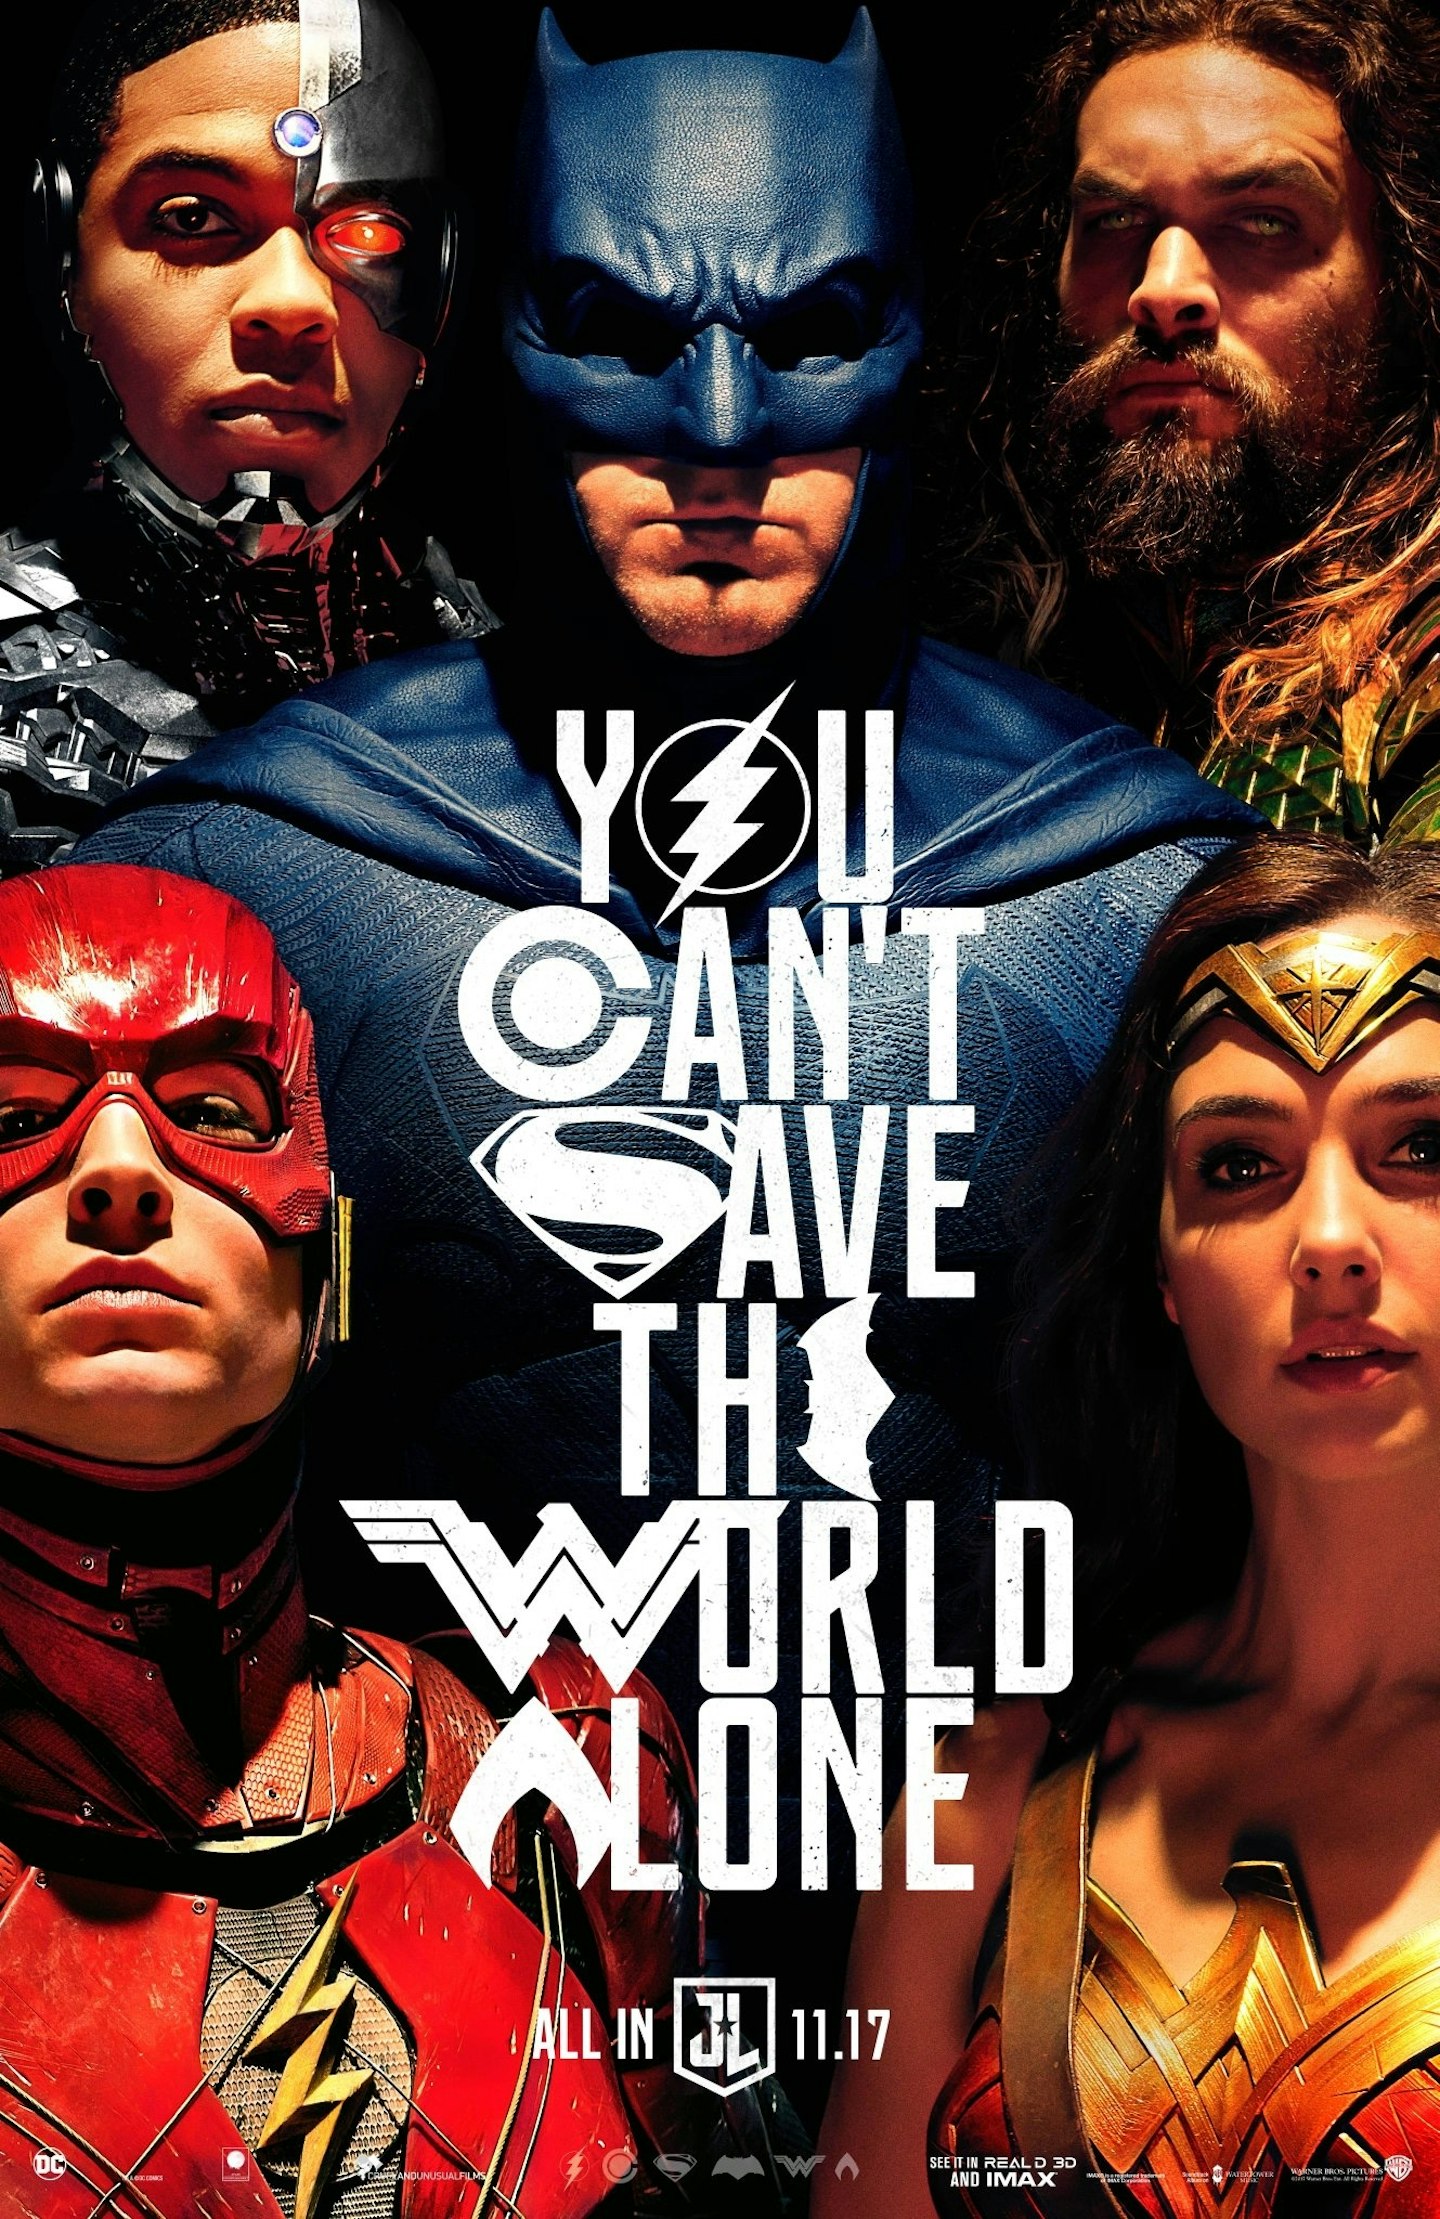 New Justice League poster